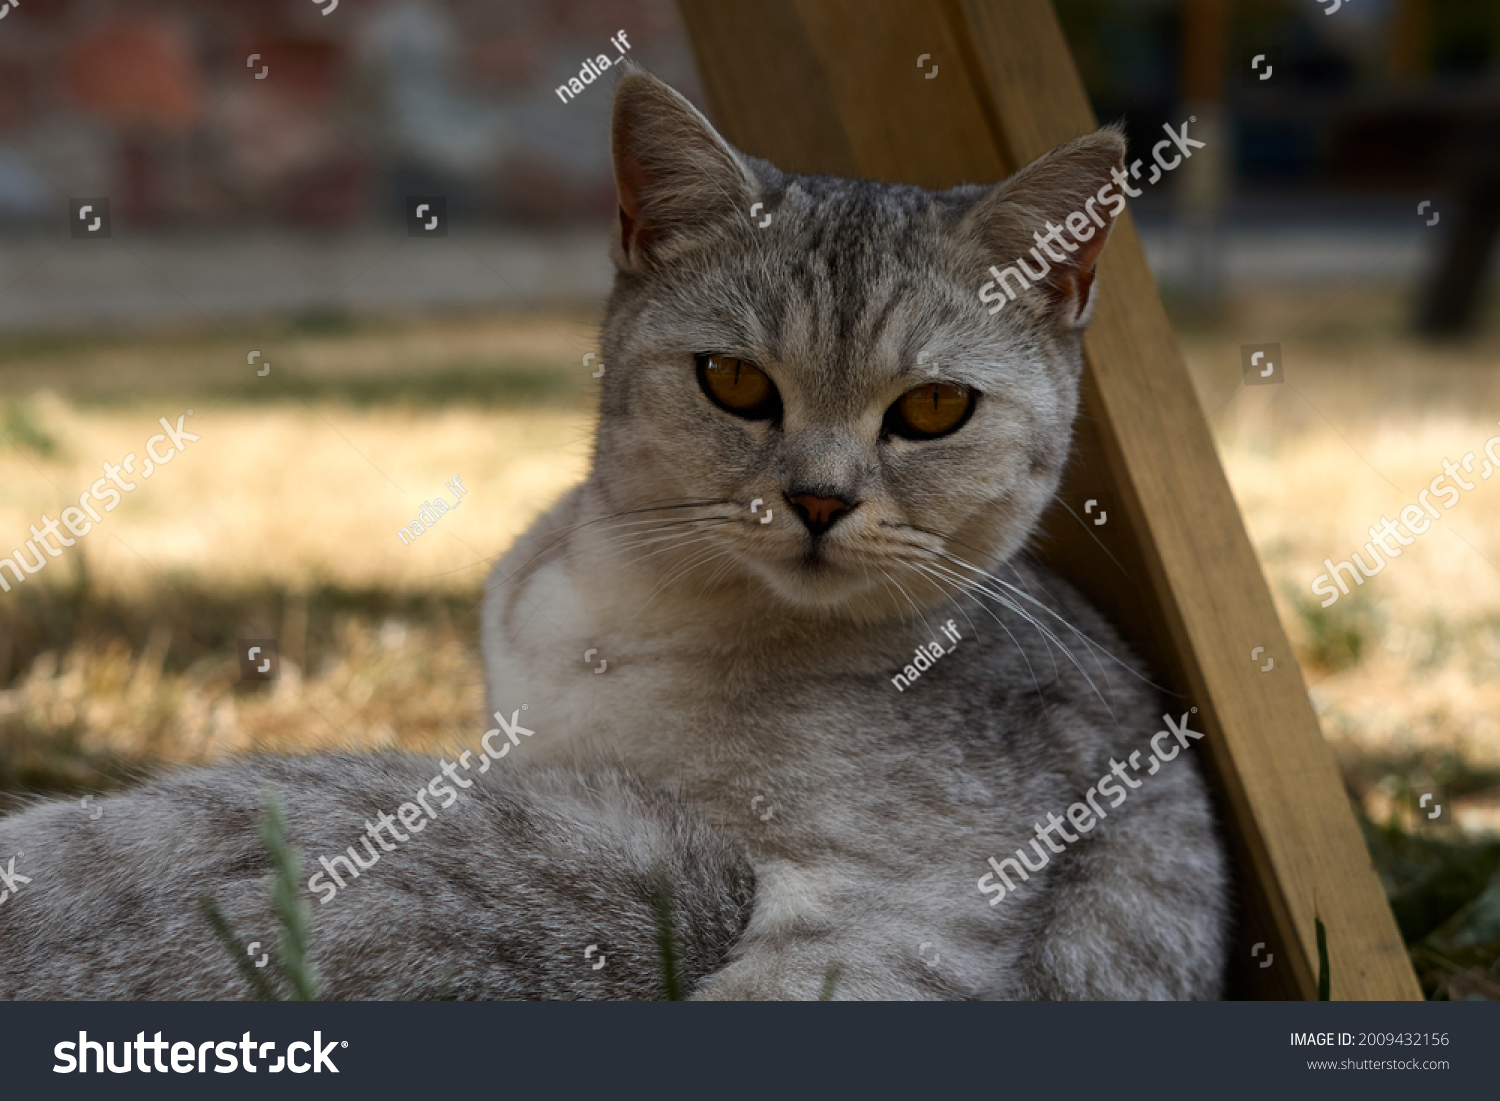 Scottish cat looking at camera. Portrait of gray tabby cat. Cute domestic animal. High quality photo #2009432156